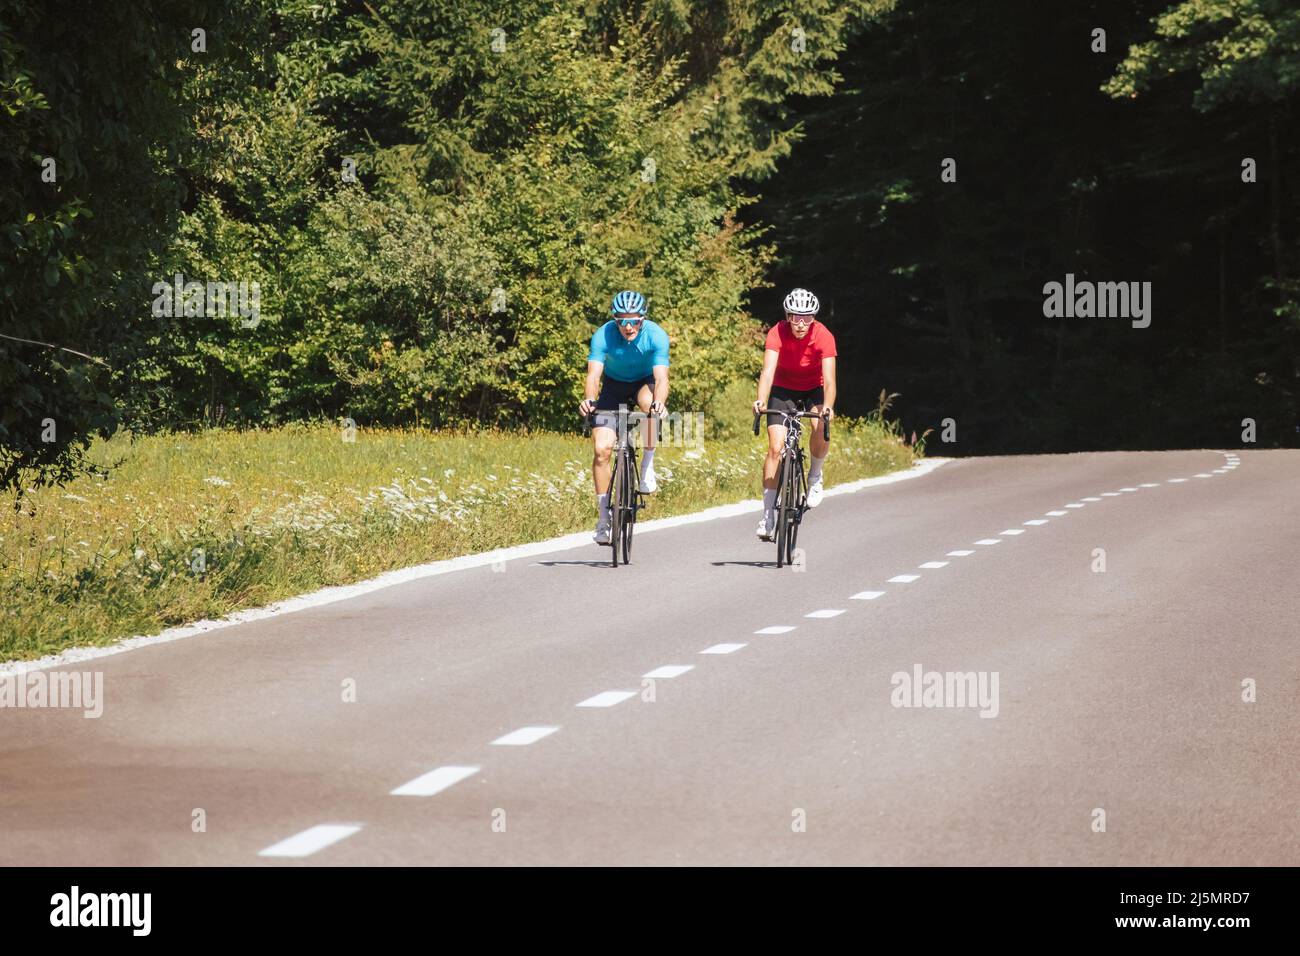 Cyclists couple on the road in summer cycling gear pedaling and gliding positions on racing cycles. Stock Photo